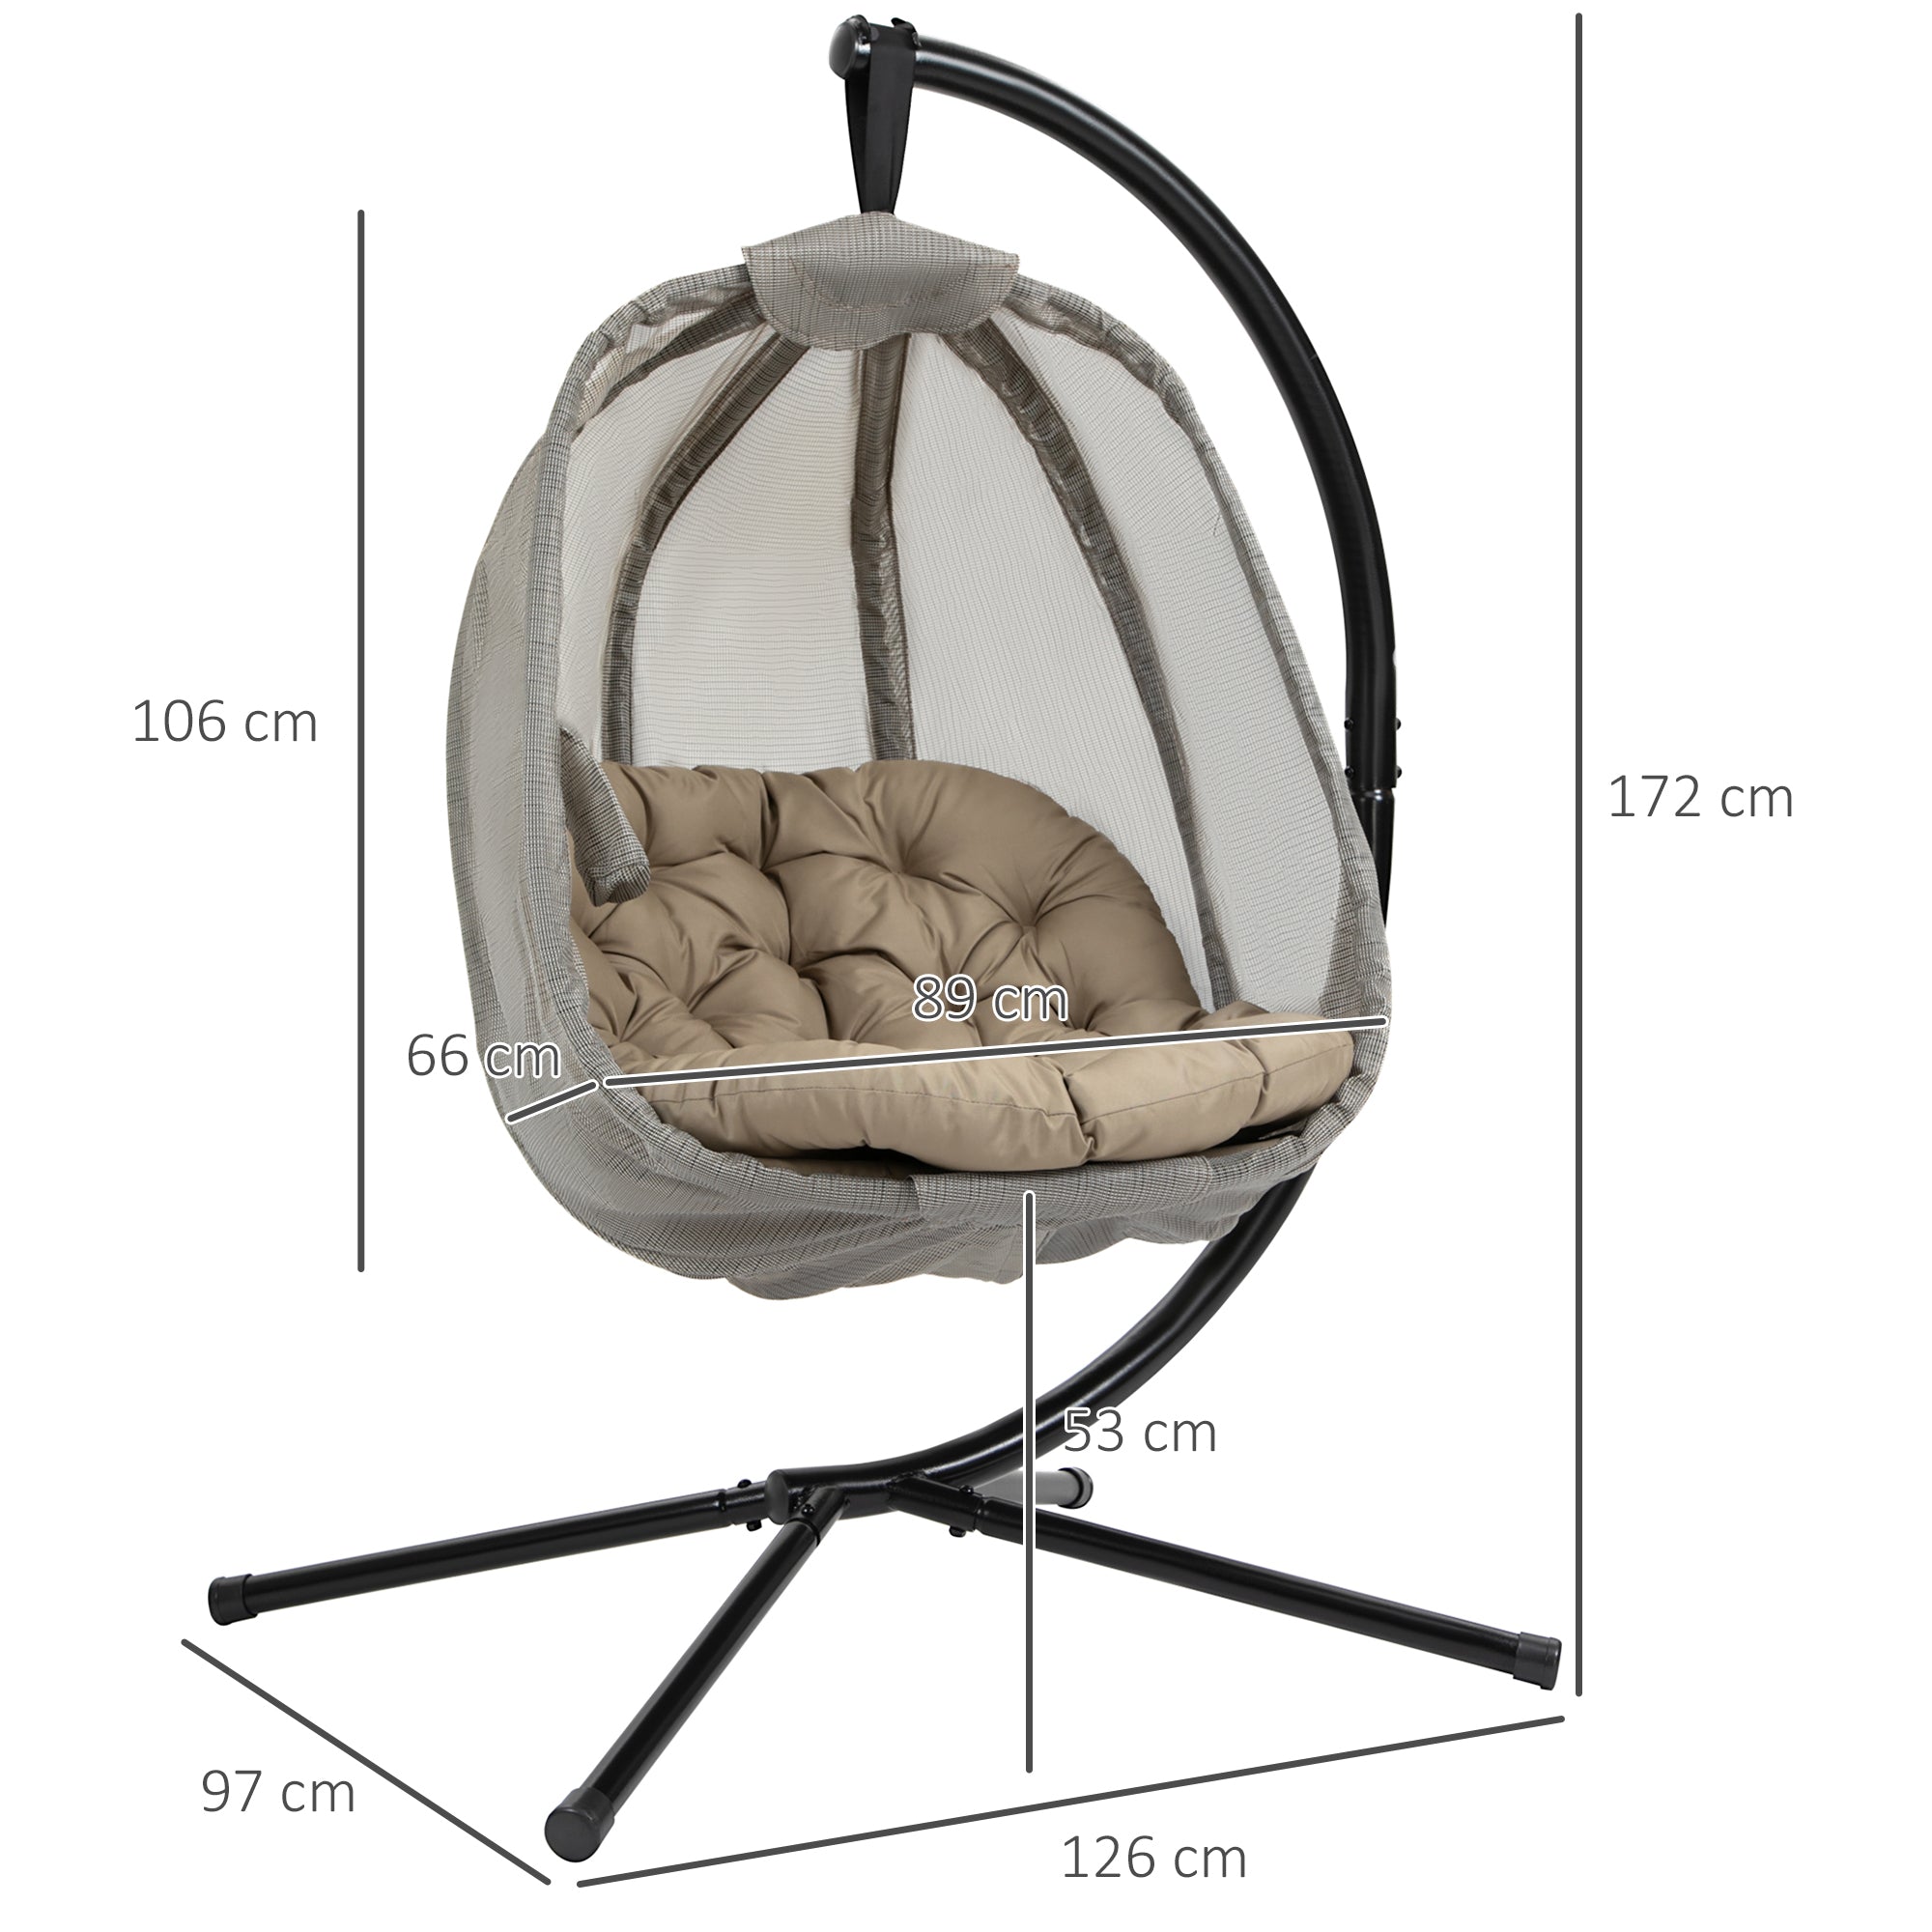 Outsunny Hanging Egg Chair, Folding Swing Hammock with Cushion and Stand for Indoor Outdoor, Patio Garden Furniture, Khaki